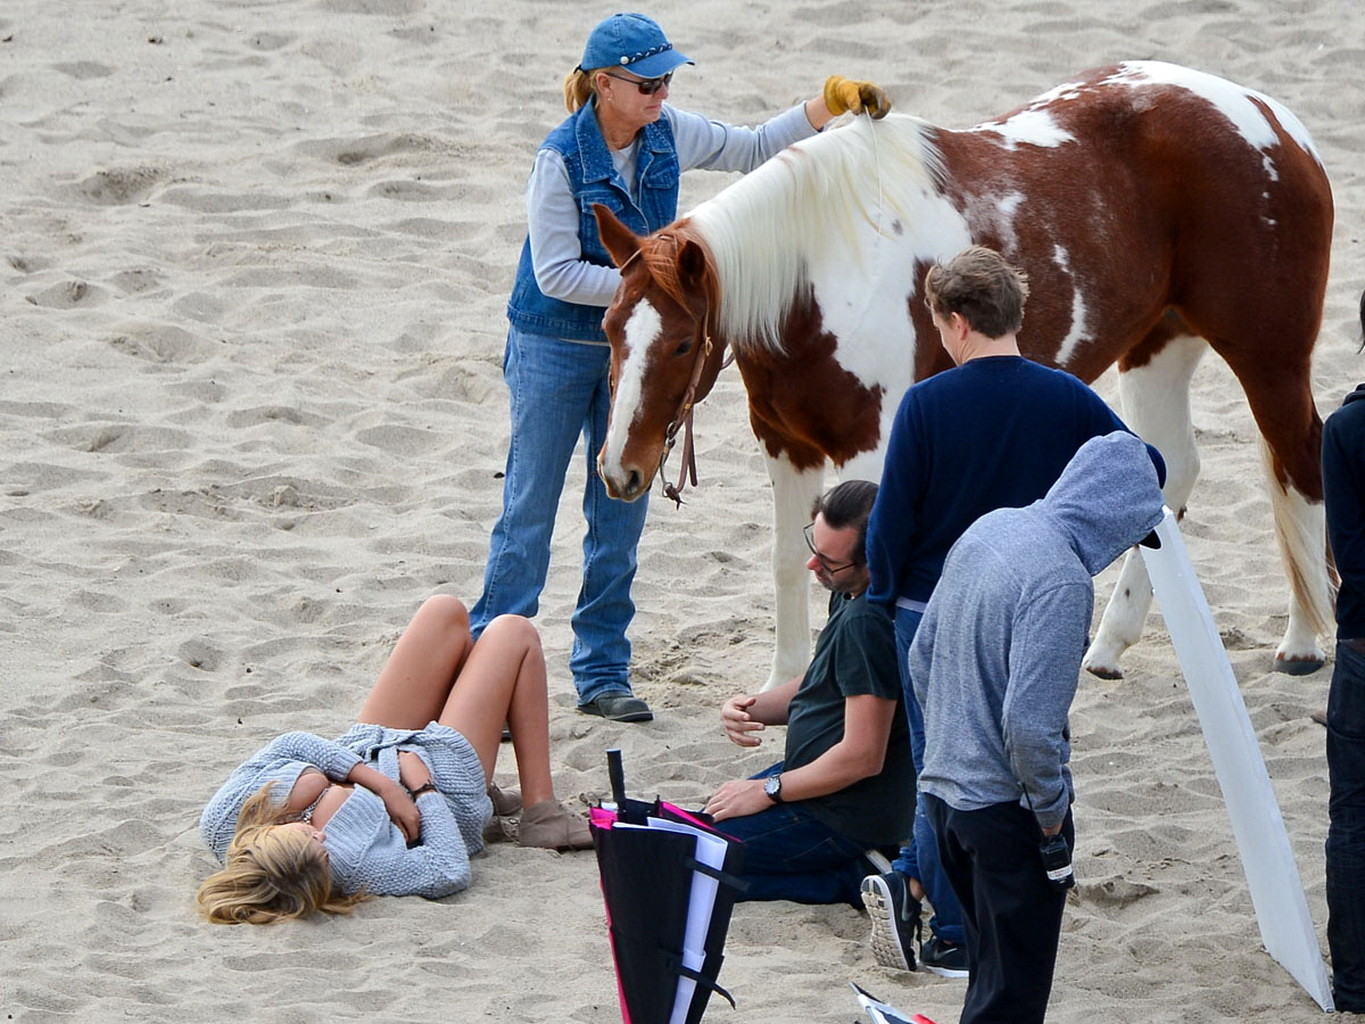 Kate Upton showing off her cleavage and ass on the set of a photoshoot in Malibu #75211956